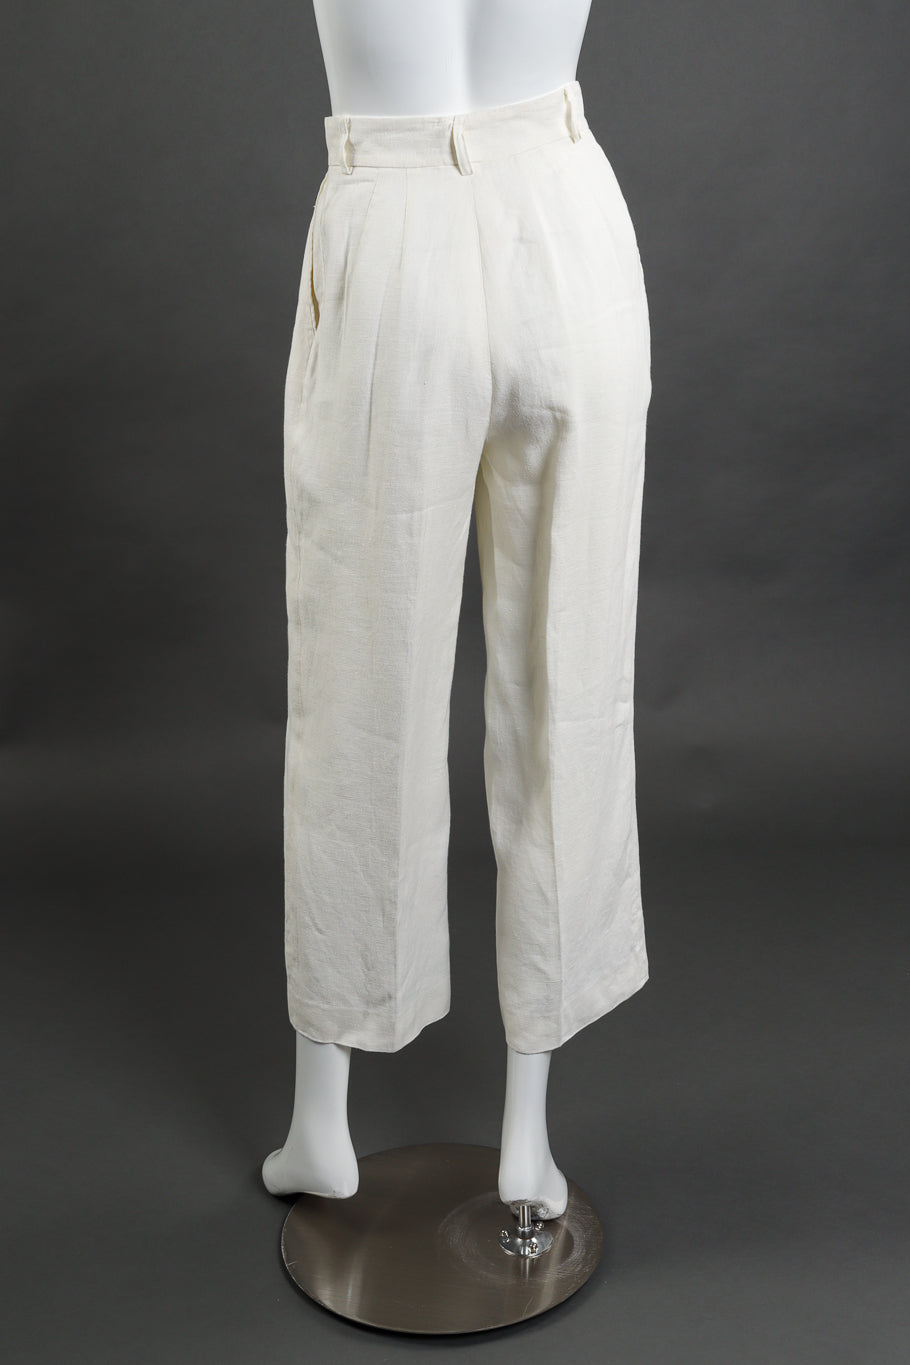 Vintage Alberta Ferretti woven linen embroidered cream mock tunic vest and pant twin set back view of trousers as worn on mannequin @Recess LA